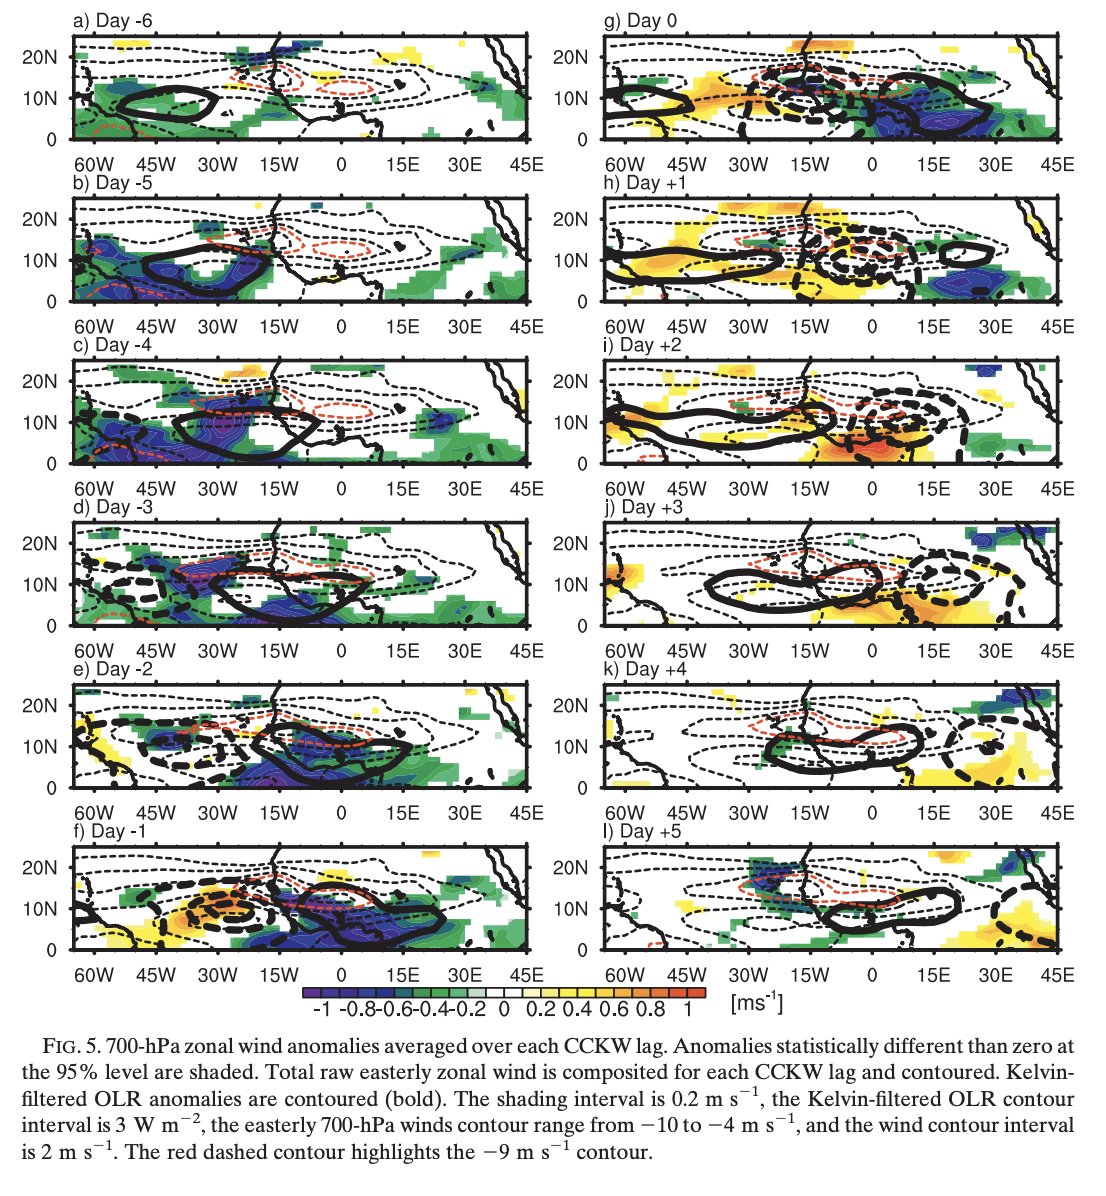 But the suppressed phase of the Kelvin wave actually primes the African easterly Jet (AEJ) in a sense, in which when the active phase begins to enter from stage left and convectively triggers African easterly waves, they can grow more barotropically against the AEJ.